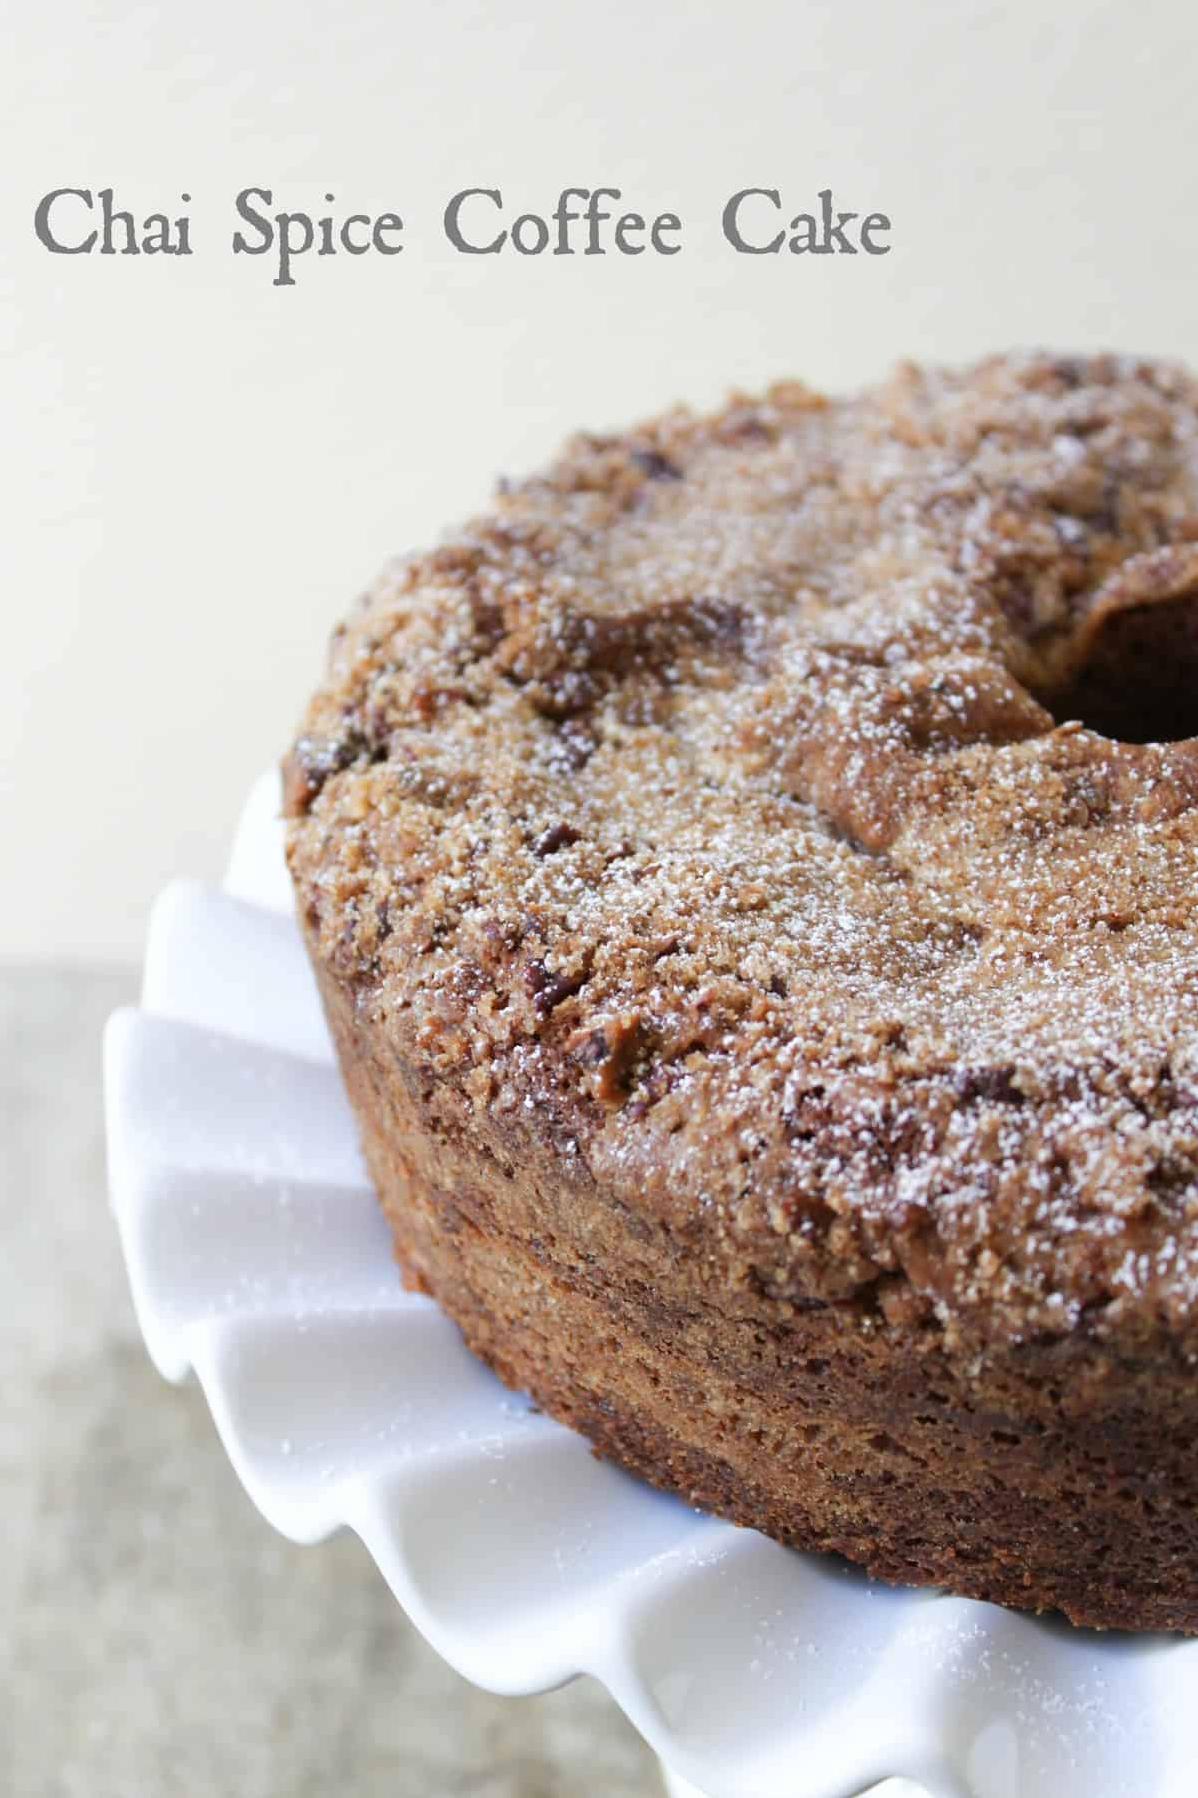  This cake is a great way to use up leftover brewed coffee